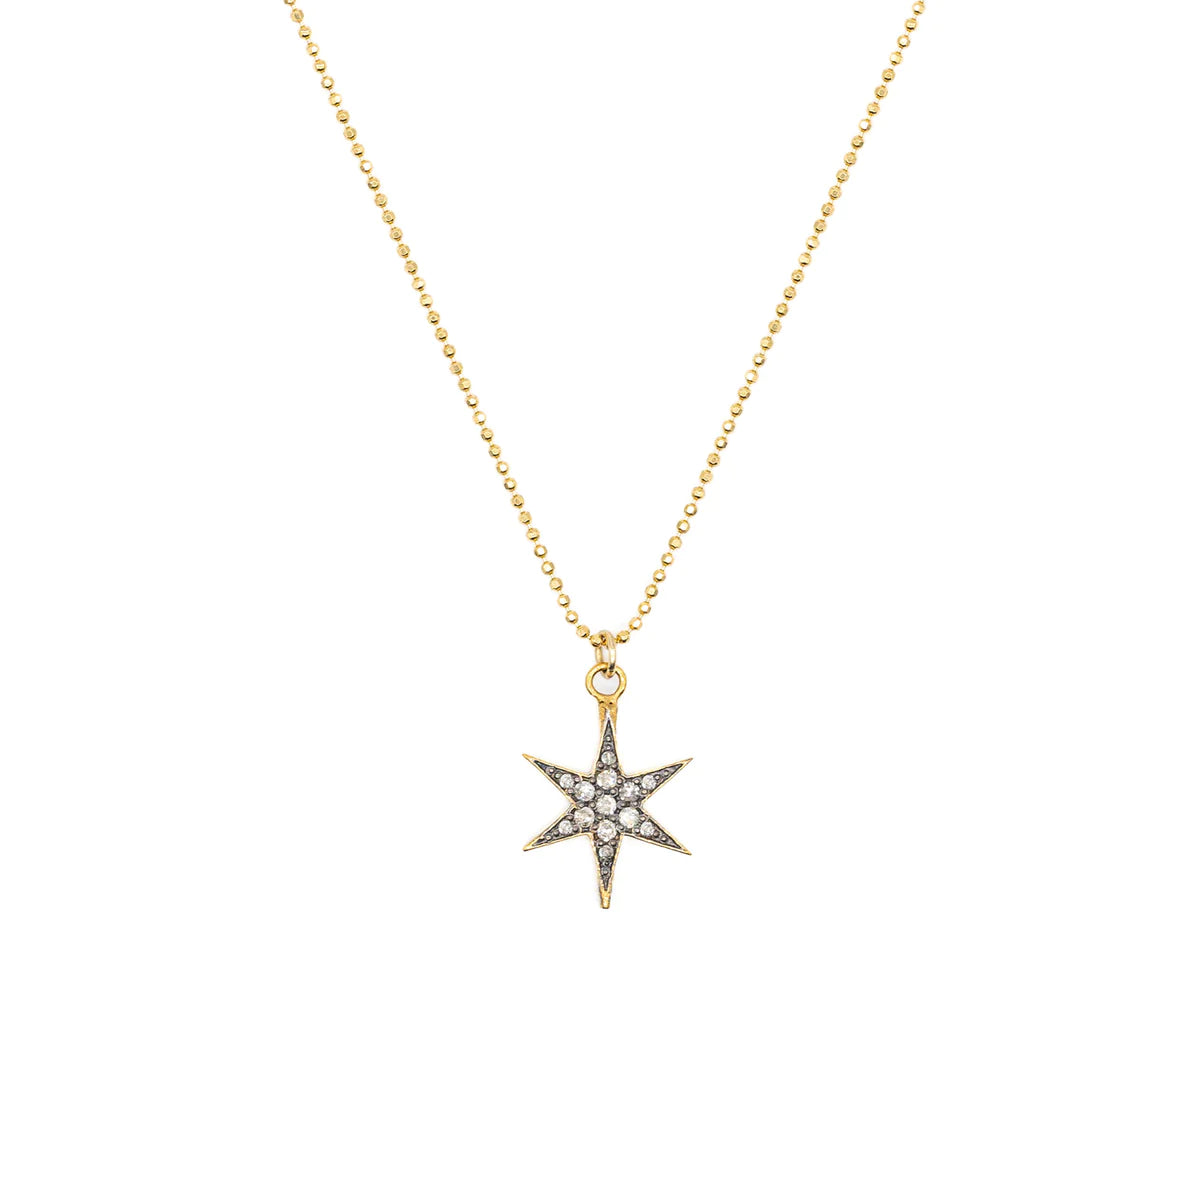 cosmic-star-gold-necklace-product-shot_1200x.webp__PID:4555933f-dc09-445d-82c0-e9995eaad23c